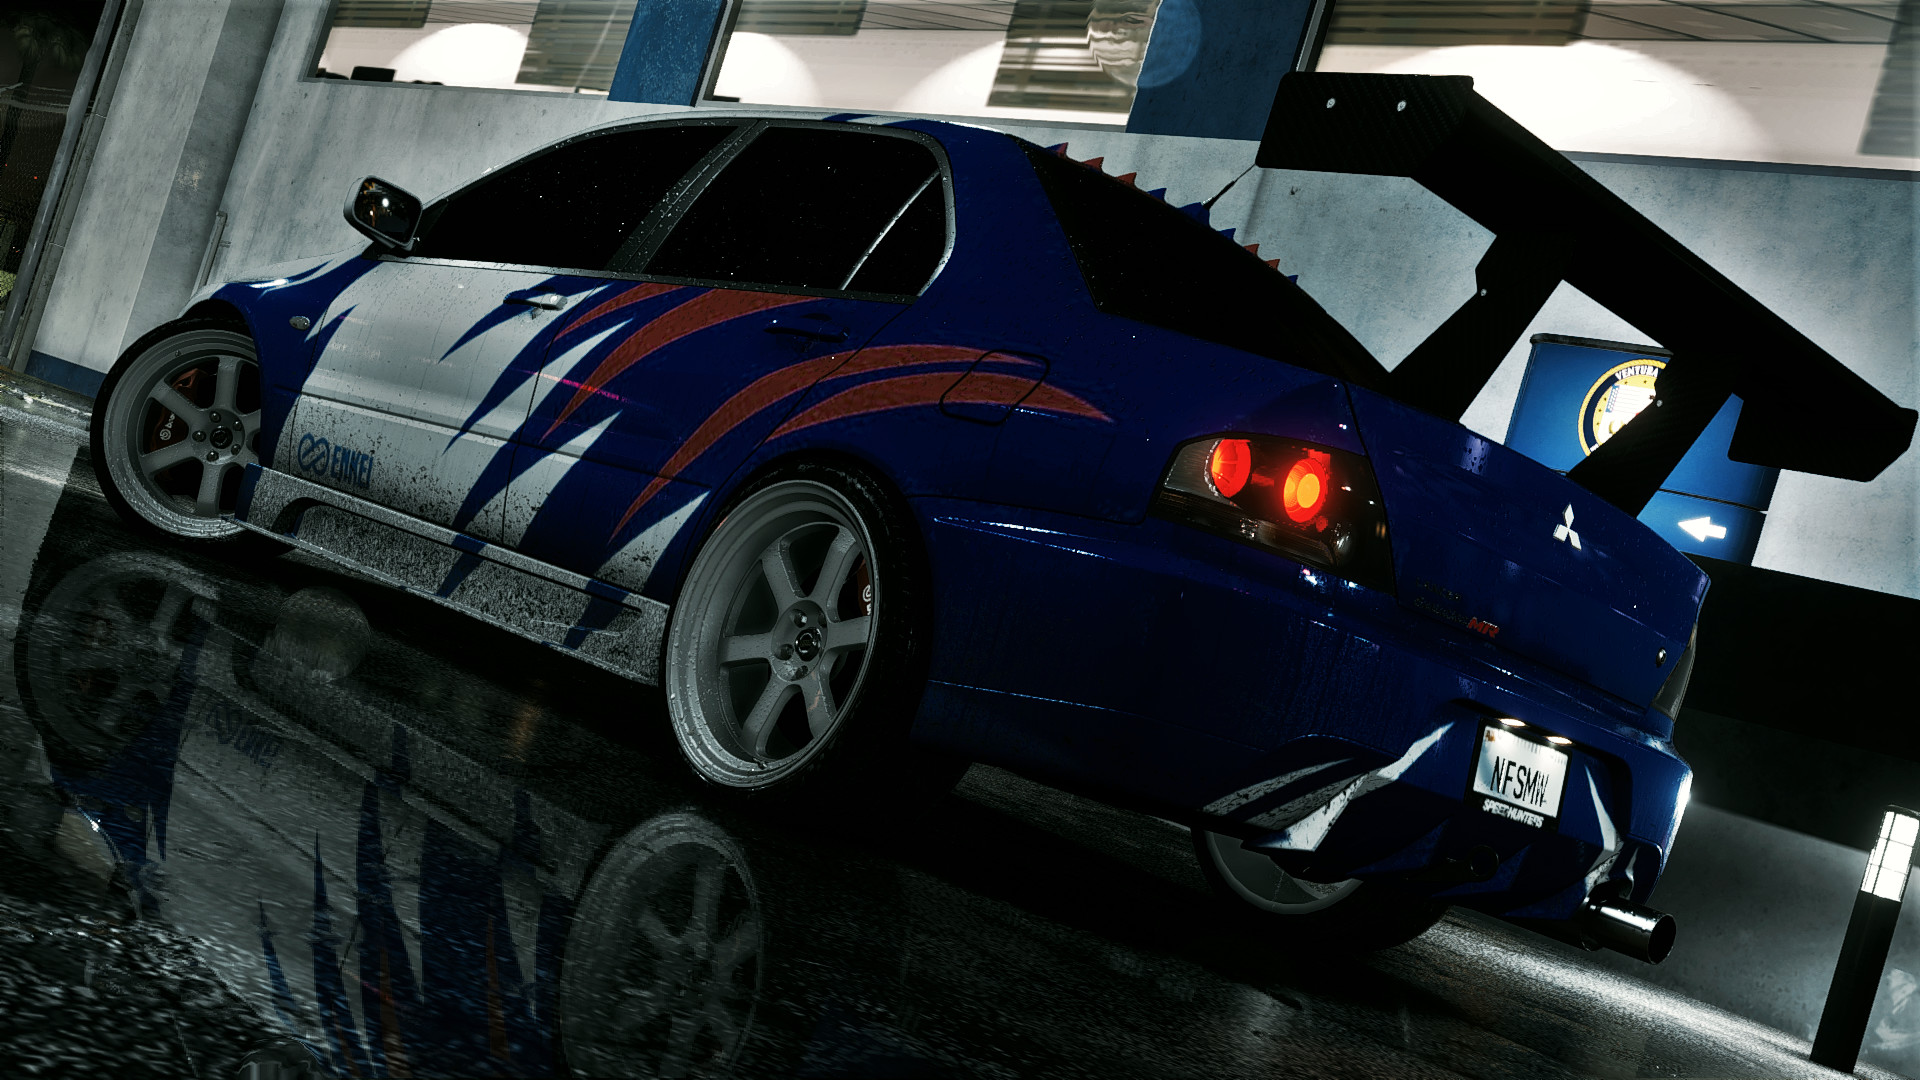 Nfs assemble. Need for Speed most wanted 2005. Mitsubishi EVO 9 NFS MW. Из need for Speed most wanted 2005. Лансер из NFS most wanted.